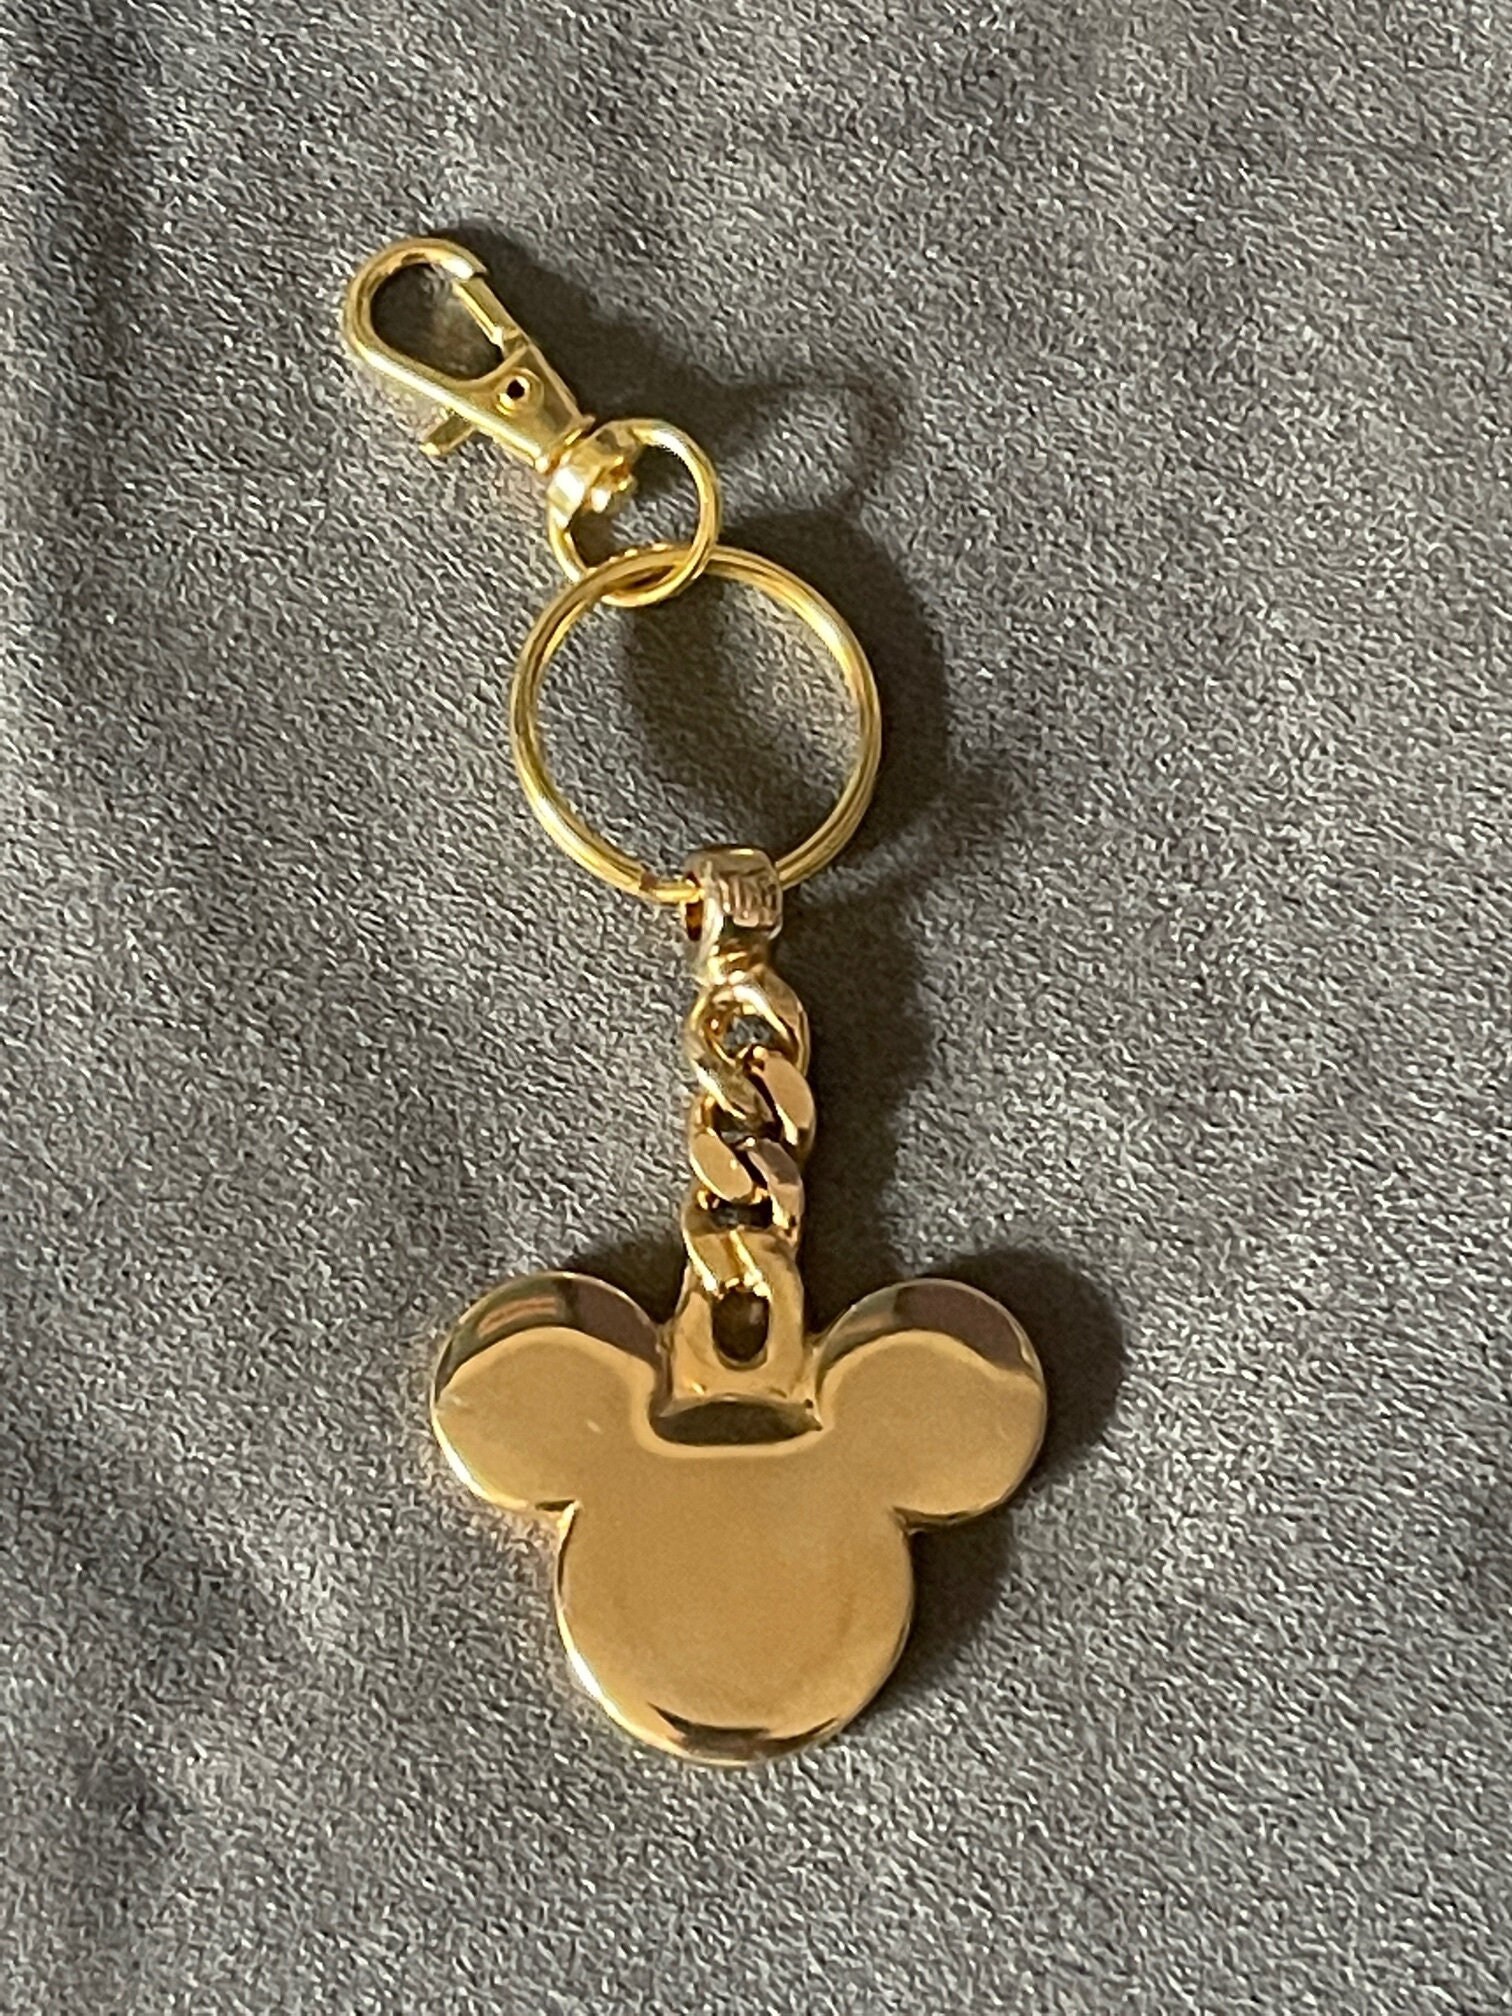 Cute Genuine Leather Keychain Mickey Mouse Lanyard Keyring Clothes